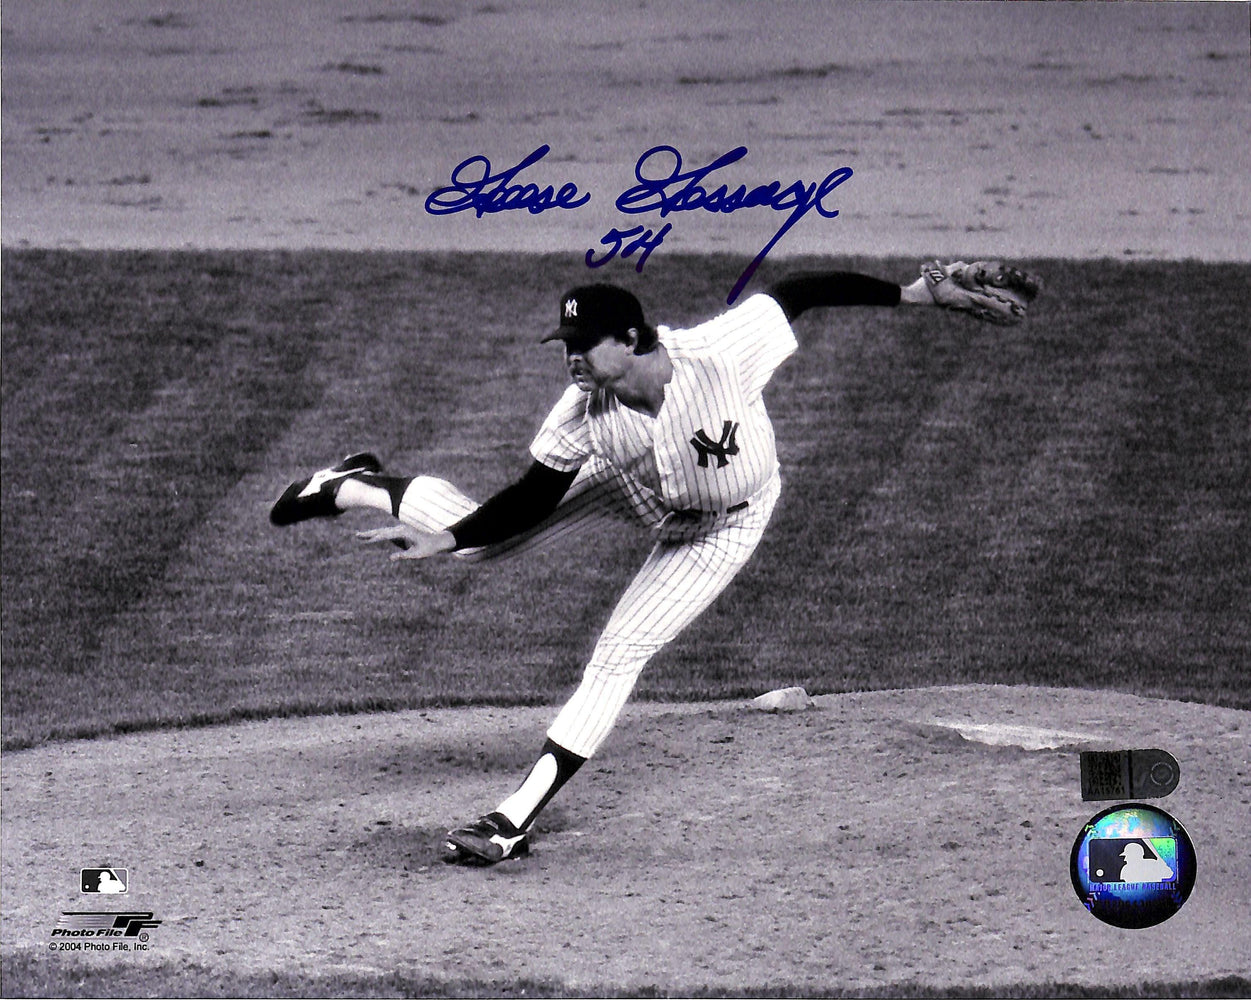 goose gossage signed 8x10 photo aiv certificate of authenticity